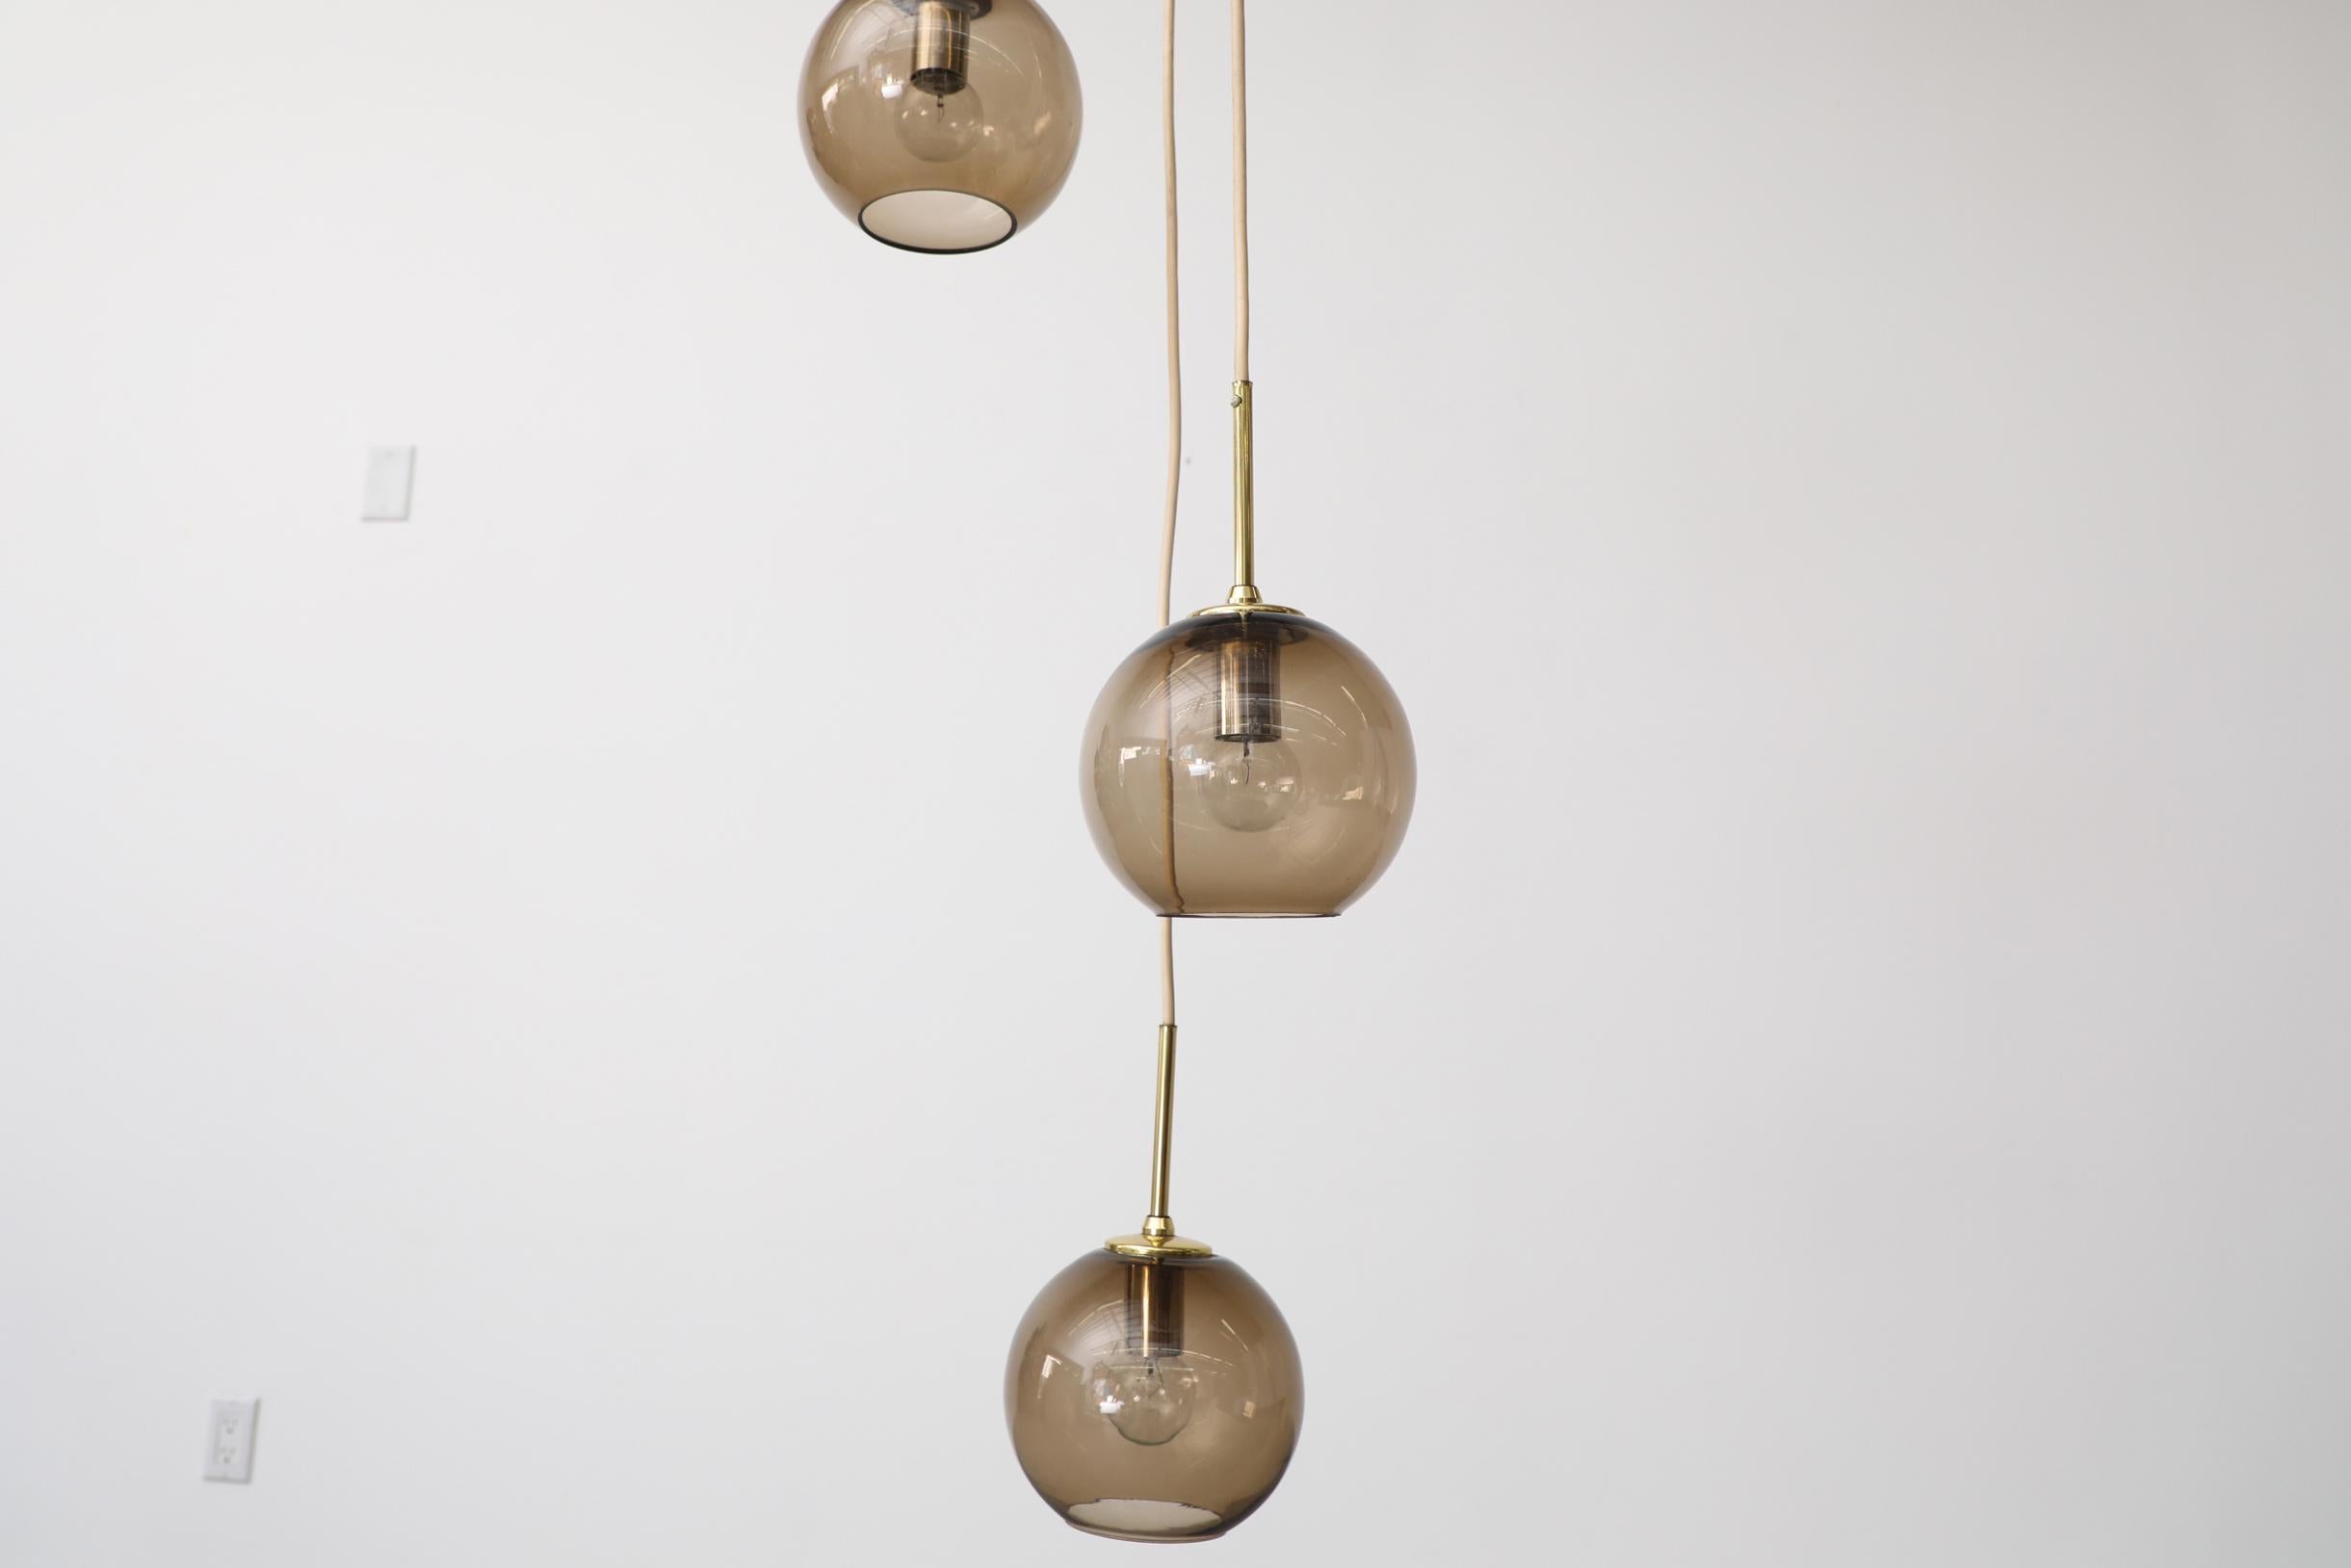 1970s Chandelier with 3 Smoked Glass Globes, Brass Hardware and Triple Canopy For Sale 5